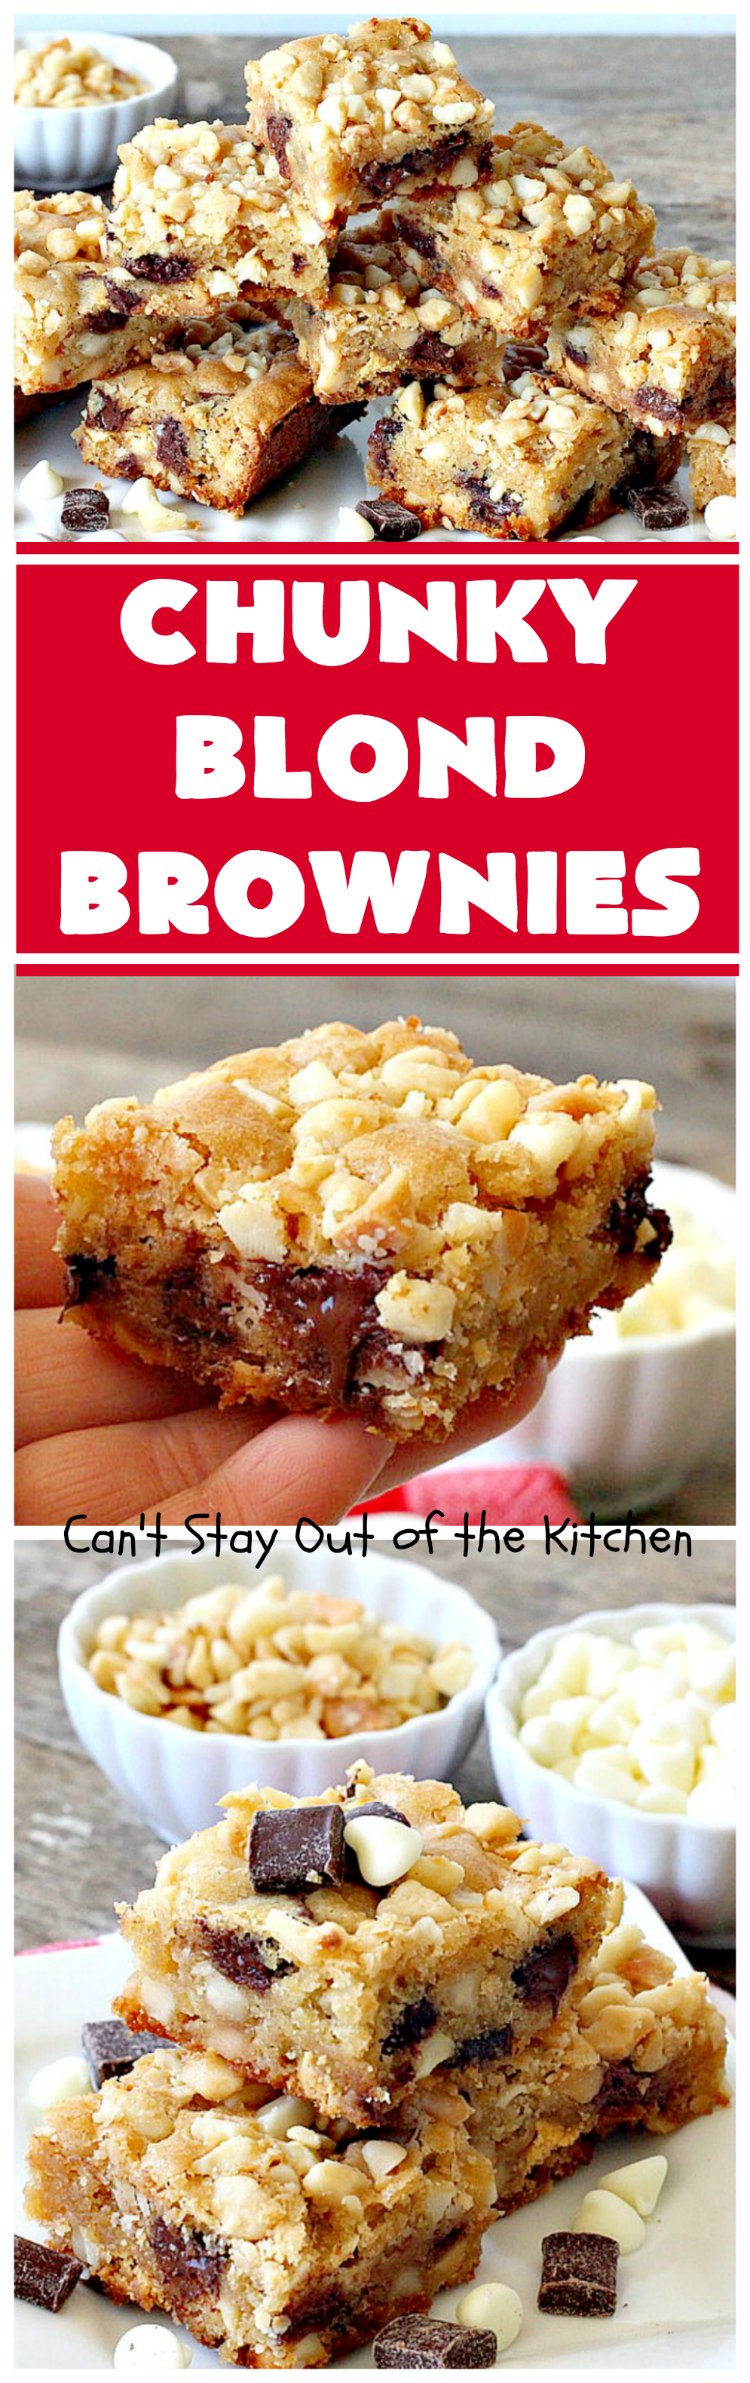 Chunky Blond Brownies | Can't Stay Out of the Kitchen